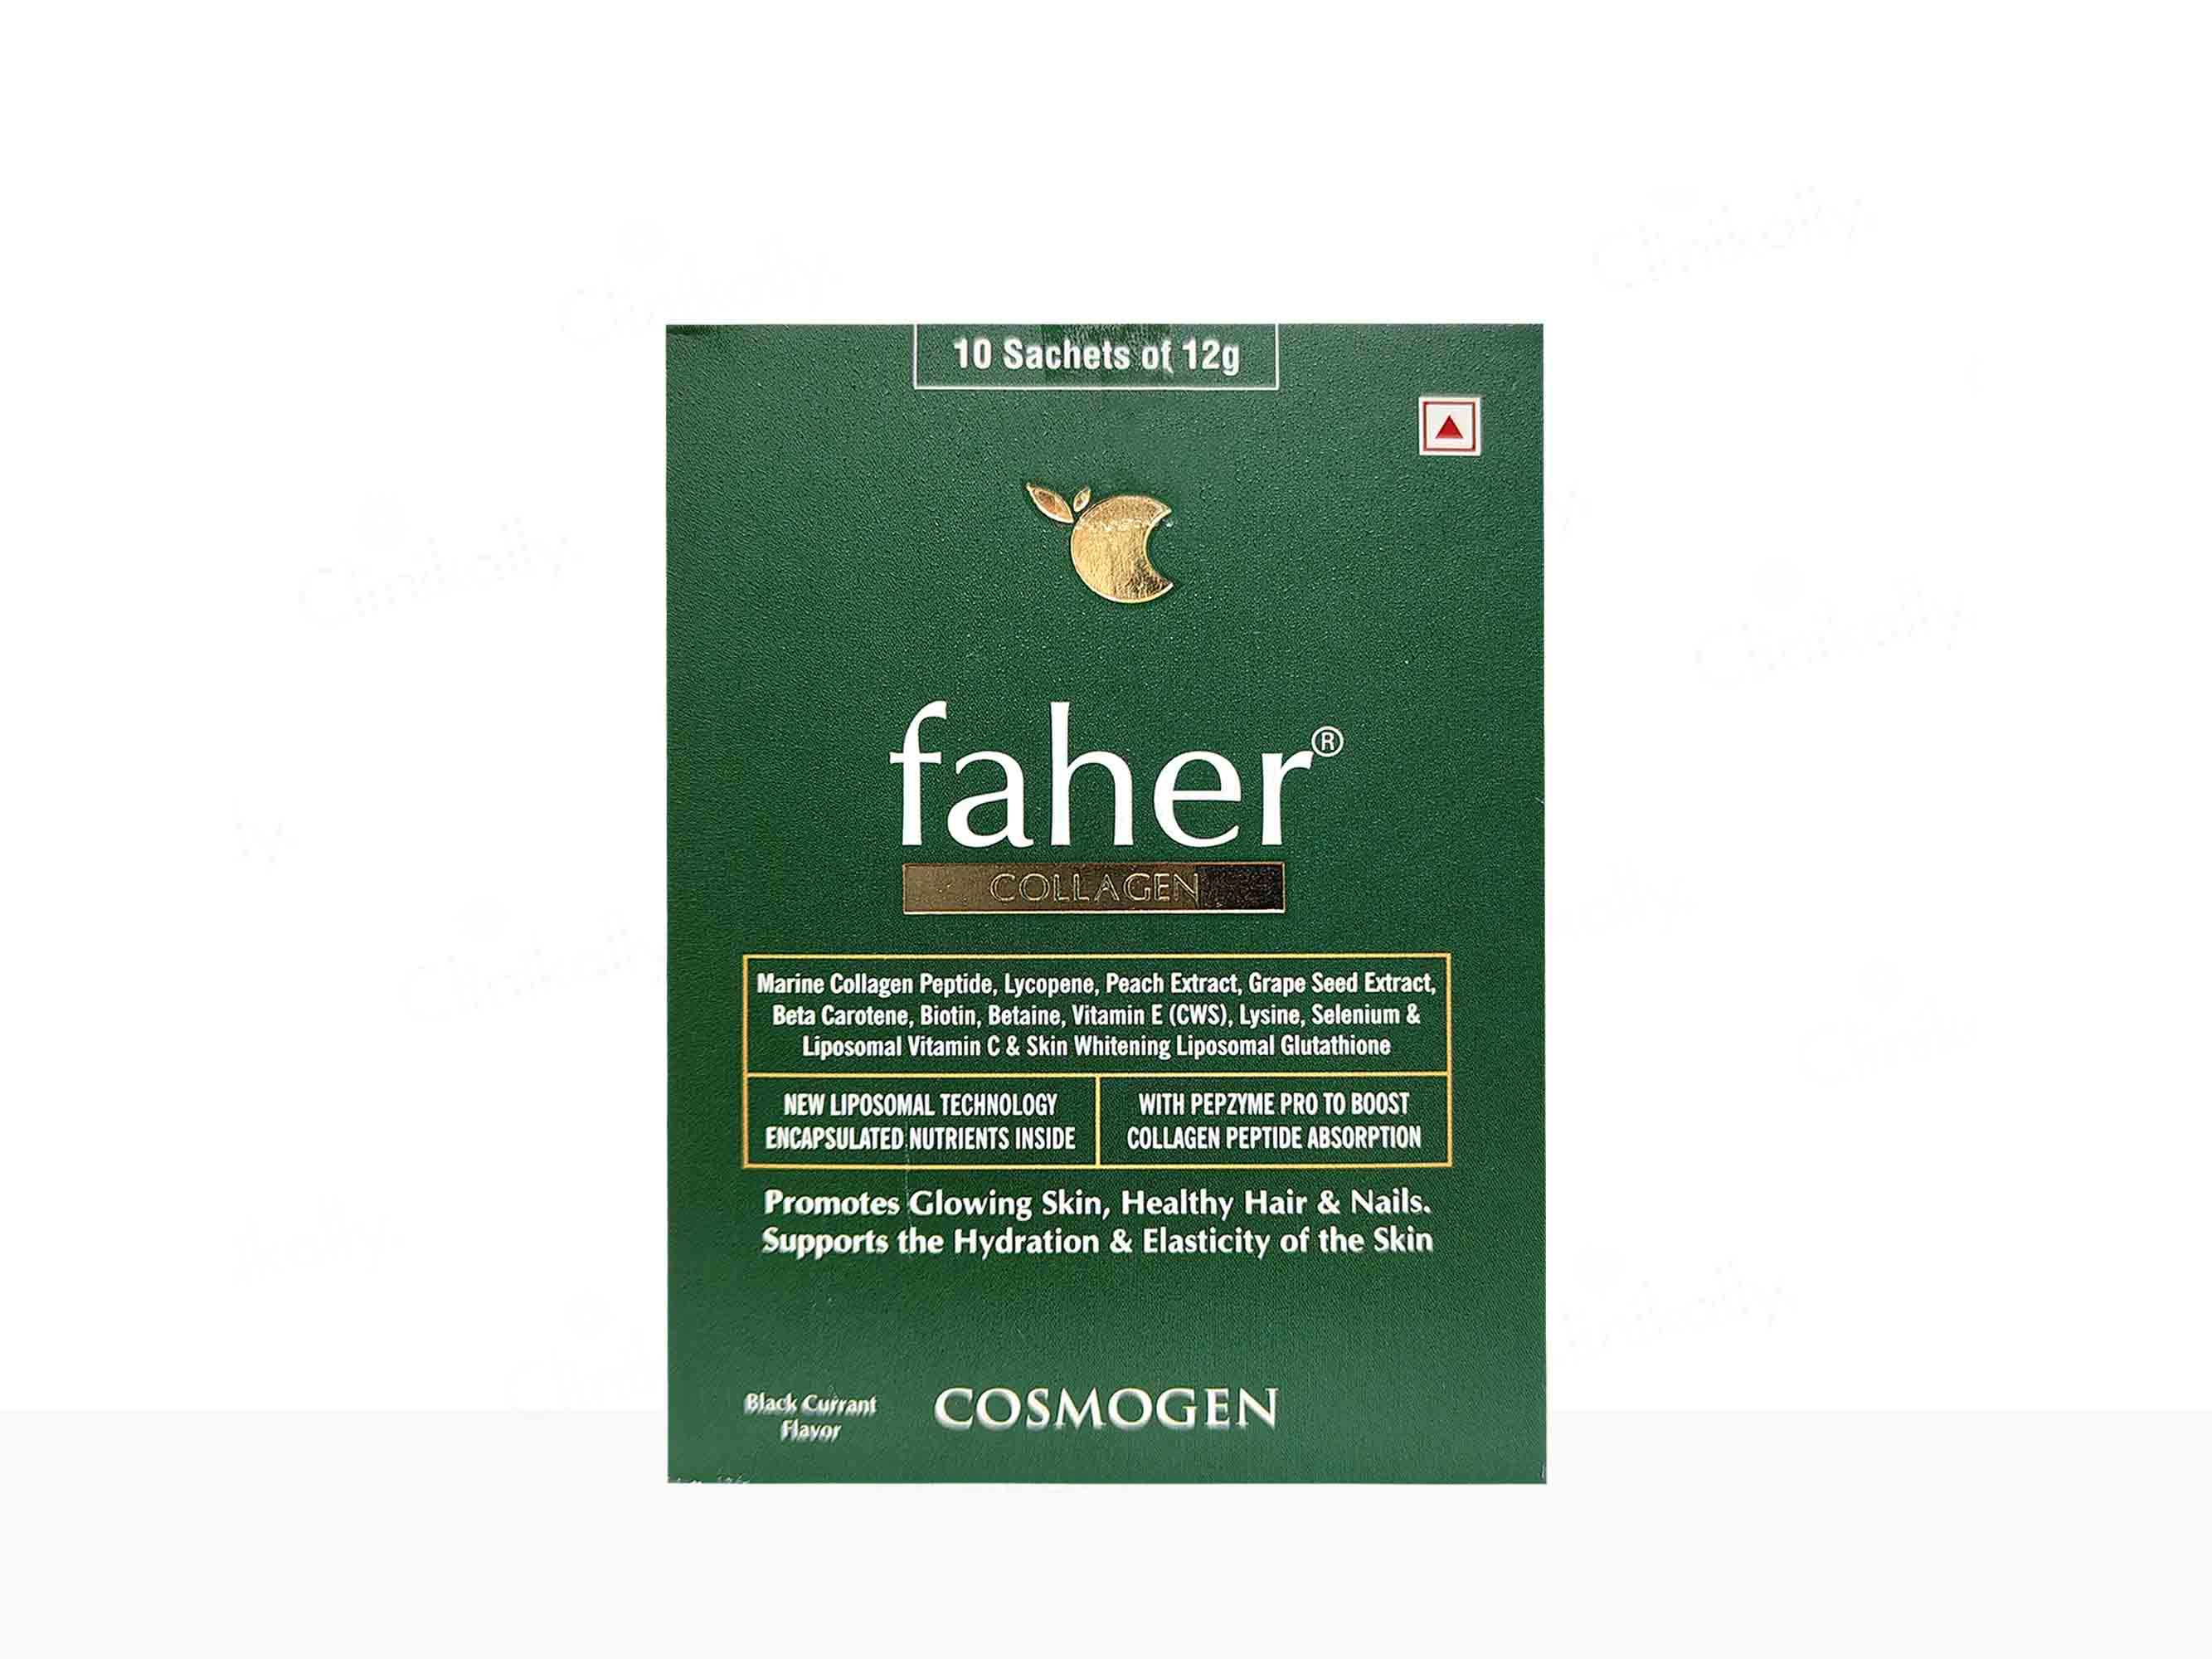 Faher Collagen For Glowing Skin, Healthy Hair, & Nails Black Current Flavour